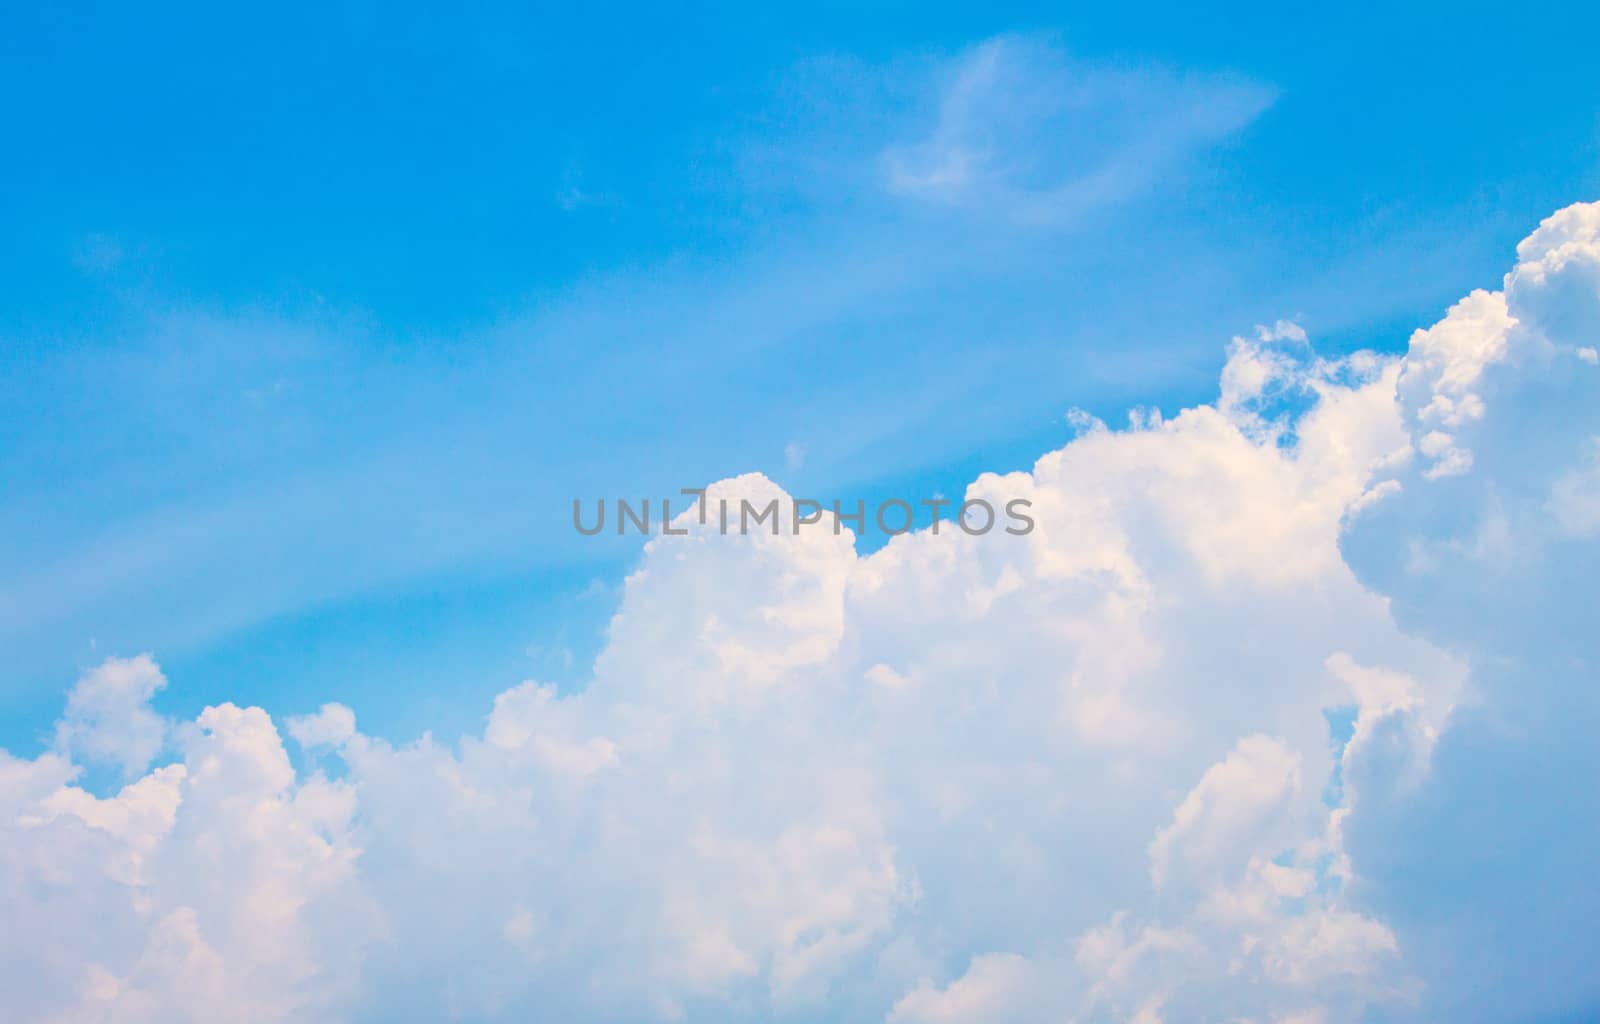 The Blue sky with white cloud